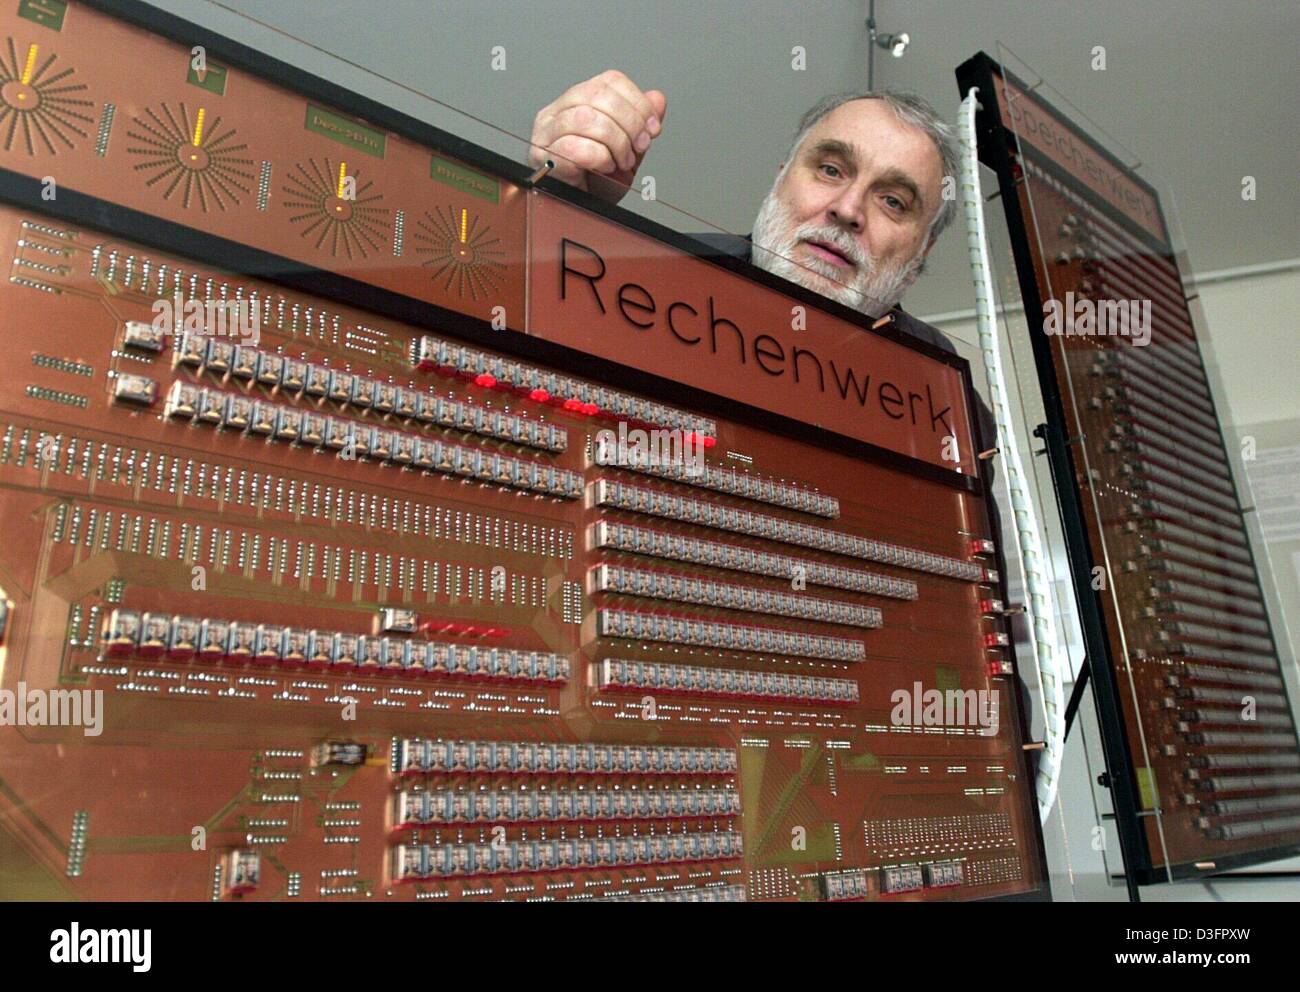 (dpa) - Leopold Stein, a member of the Zuse society, presents a replica of the Z 3, the legendary first calculator of the computer pioneer Konrad Zuse, at the Konrad Zuse museum in Huenfeld, Germany, 3 April 2003. The title on the chip board reads 'Rechenwerk' (calculatory works). The original Z3 computer was presented by Konrad Zuse at his home on 12 May 1941: it was the first pro Stock Photo